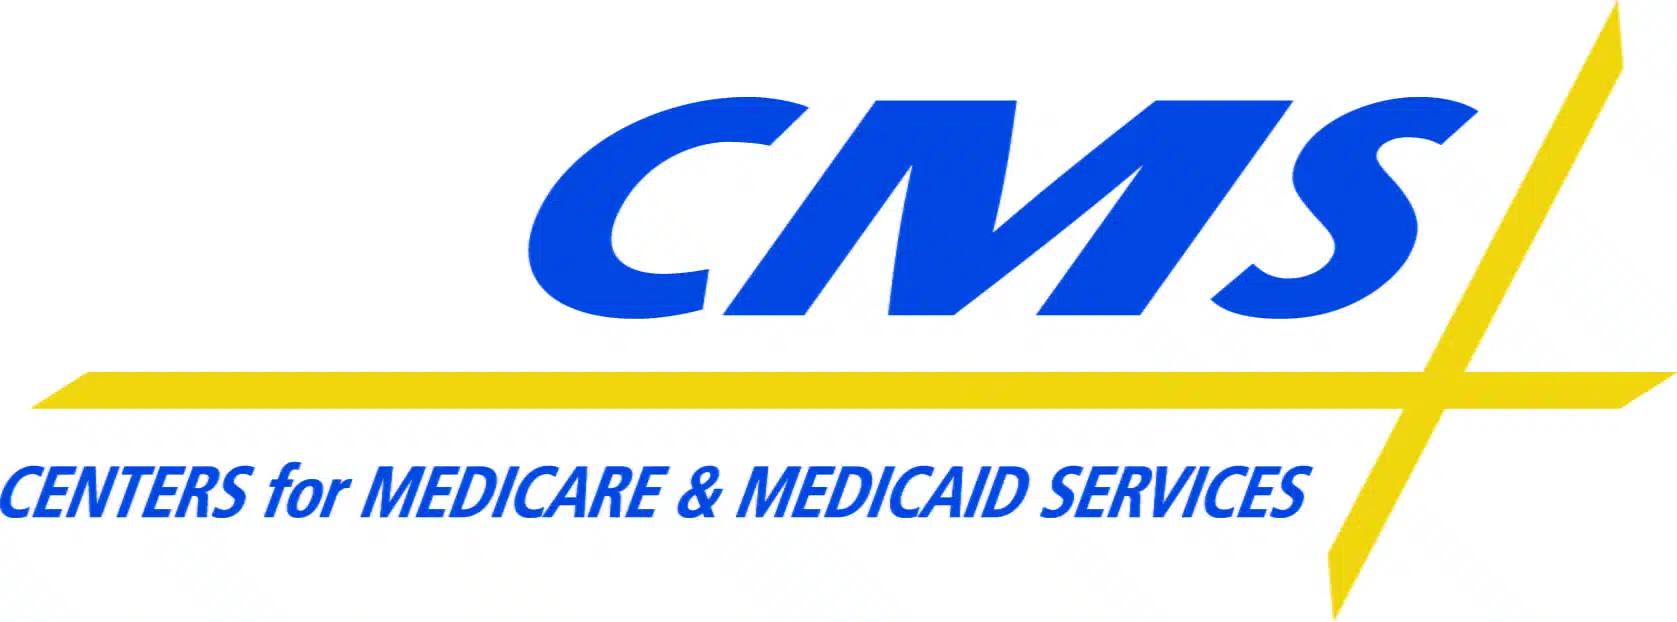 CMS Finalizes 2018 MPFS Payment and Policy Changes - Allzone